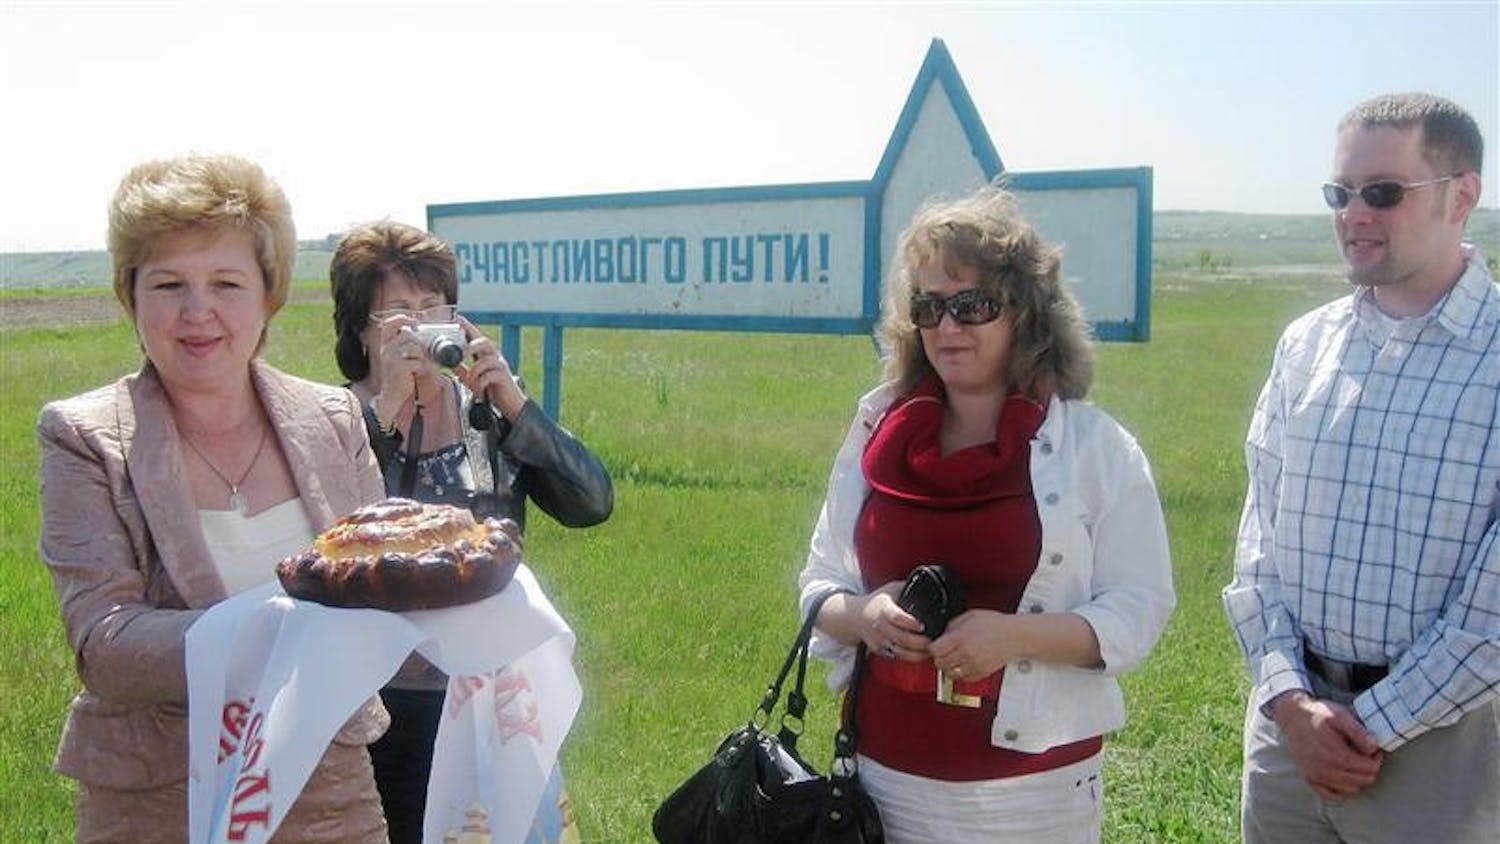 Two directors (left) of a regional hospital near Azov, Russia, present IUPUI adjunct professor Natalia Rehkter and IUPUI nursing student Gavyn Ryan a symbolic loaf of bread May 21, 2009. The bread was baked by the doctors and nurses of the hospital to welcome their first American guests.